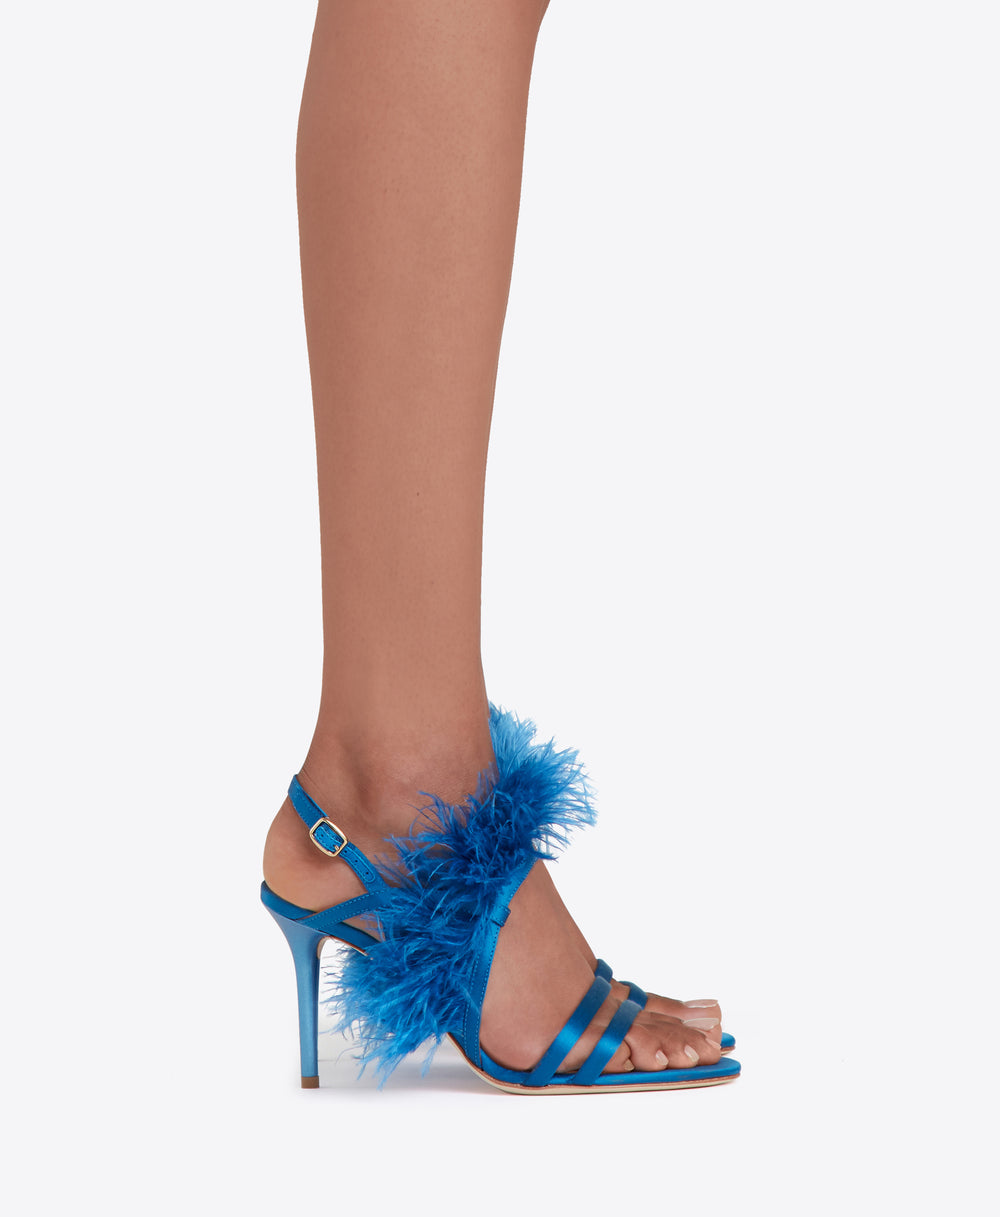 Women's Blue Satin Heeled Sandal with Feathers Malone Souliers